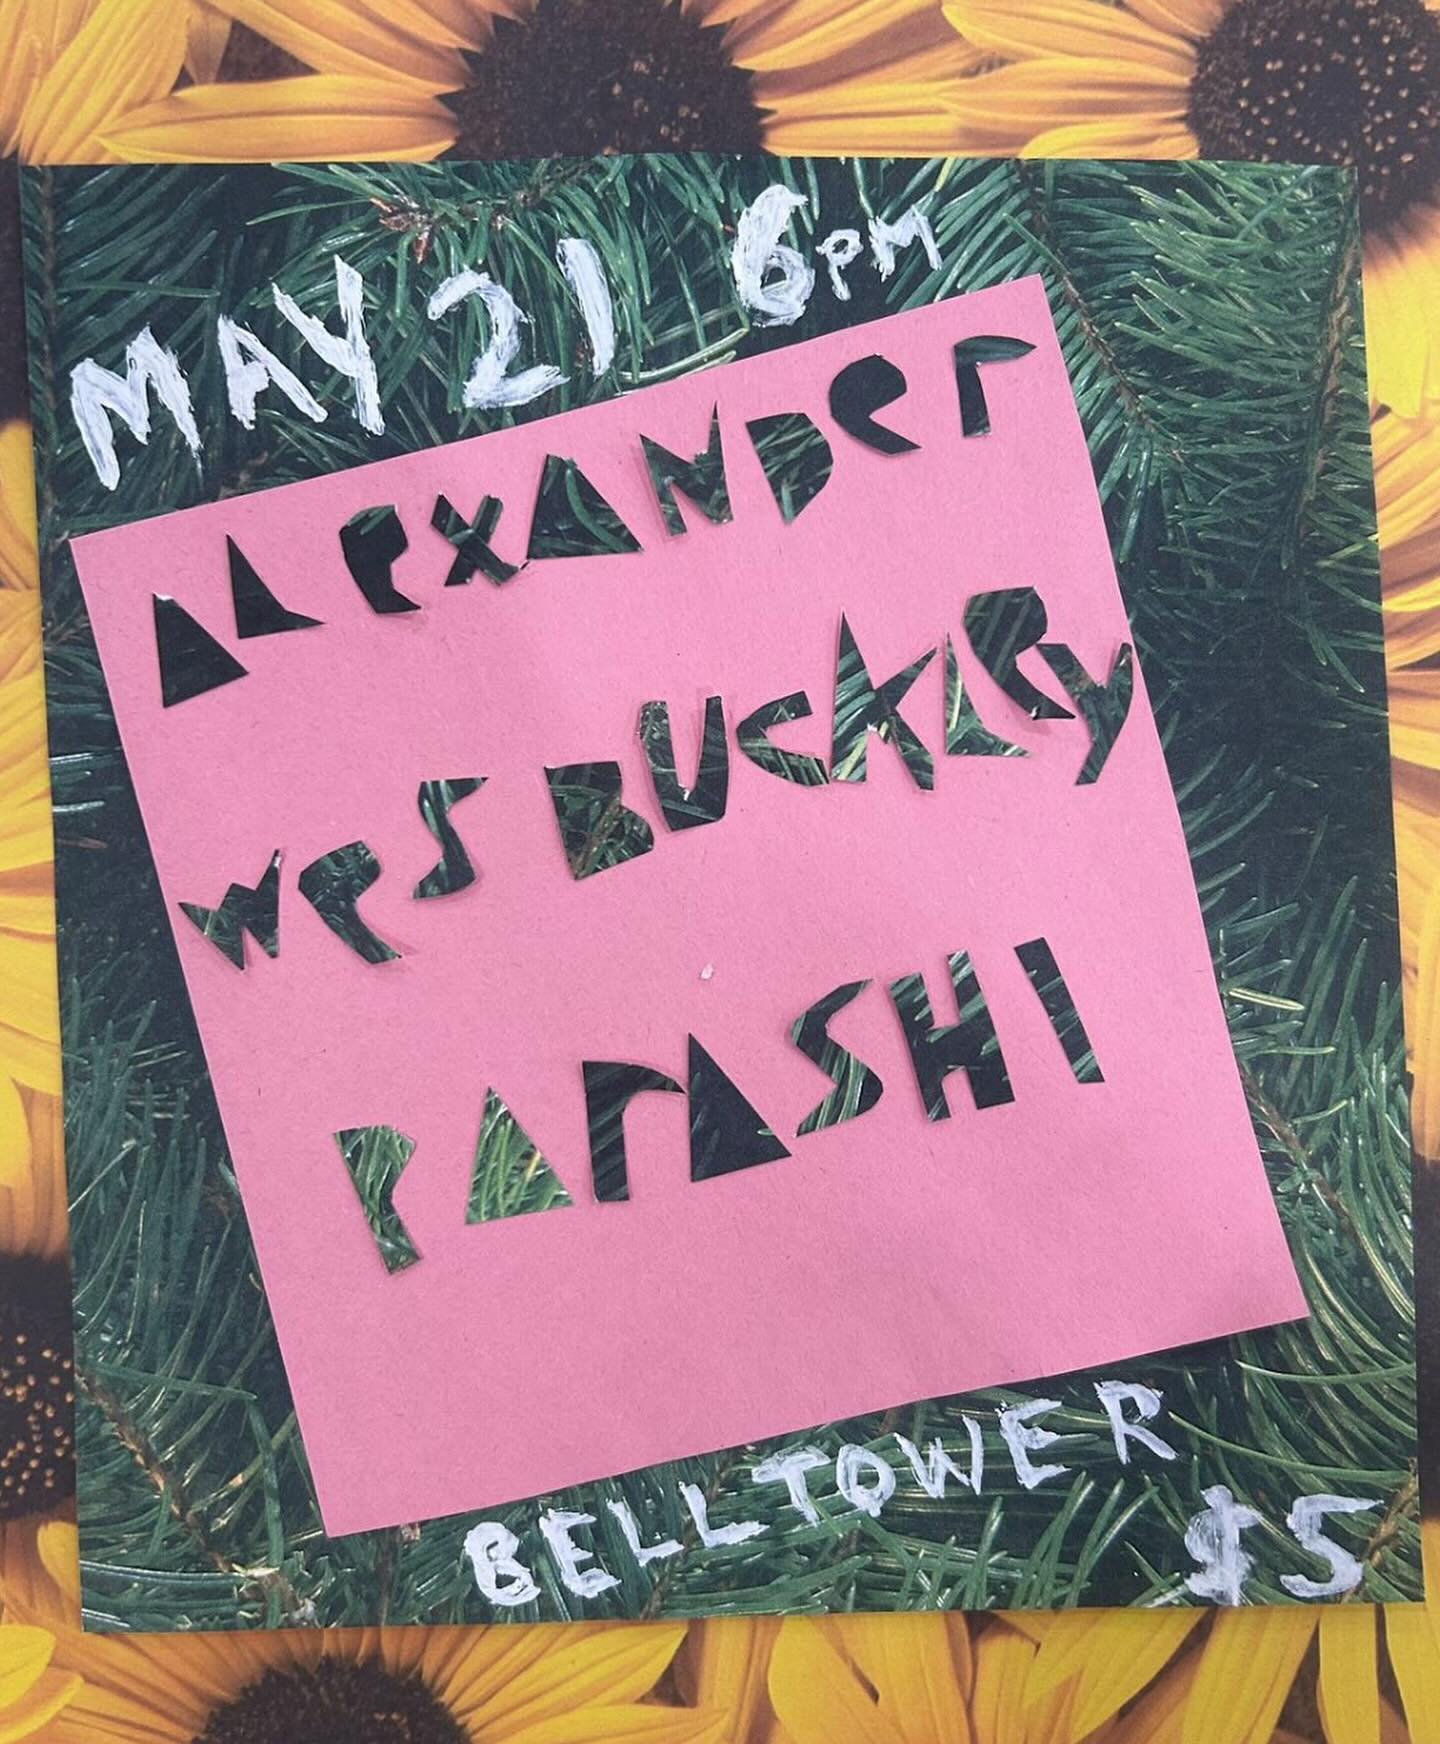 Here&rsquo;s what&rsquo;s next for shows at the shop!

5/21 - ALEXANDER, WES BUCKLEY, PARASHI (@das_guitar , @wesbuckleymusic , @parashi66 )

5/25 - LUPO CITTA, GERM HOUSE, CREATIVE WRITING (@chris.brokaw , @germ_house , @creativewritingband )

Hope 